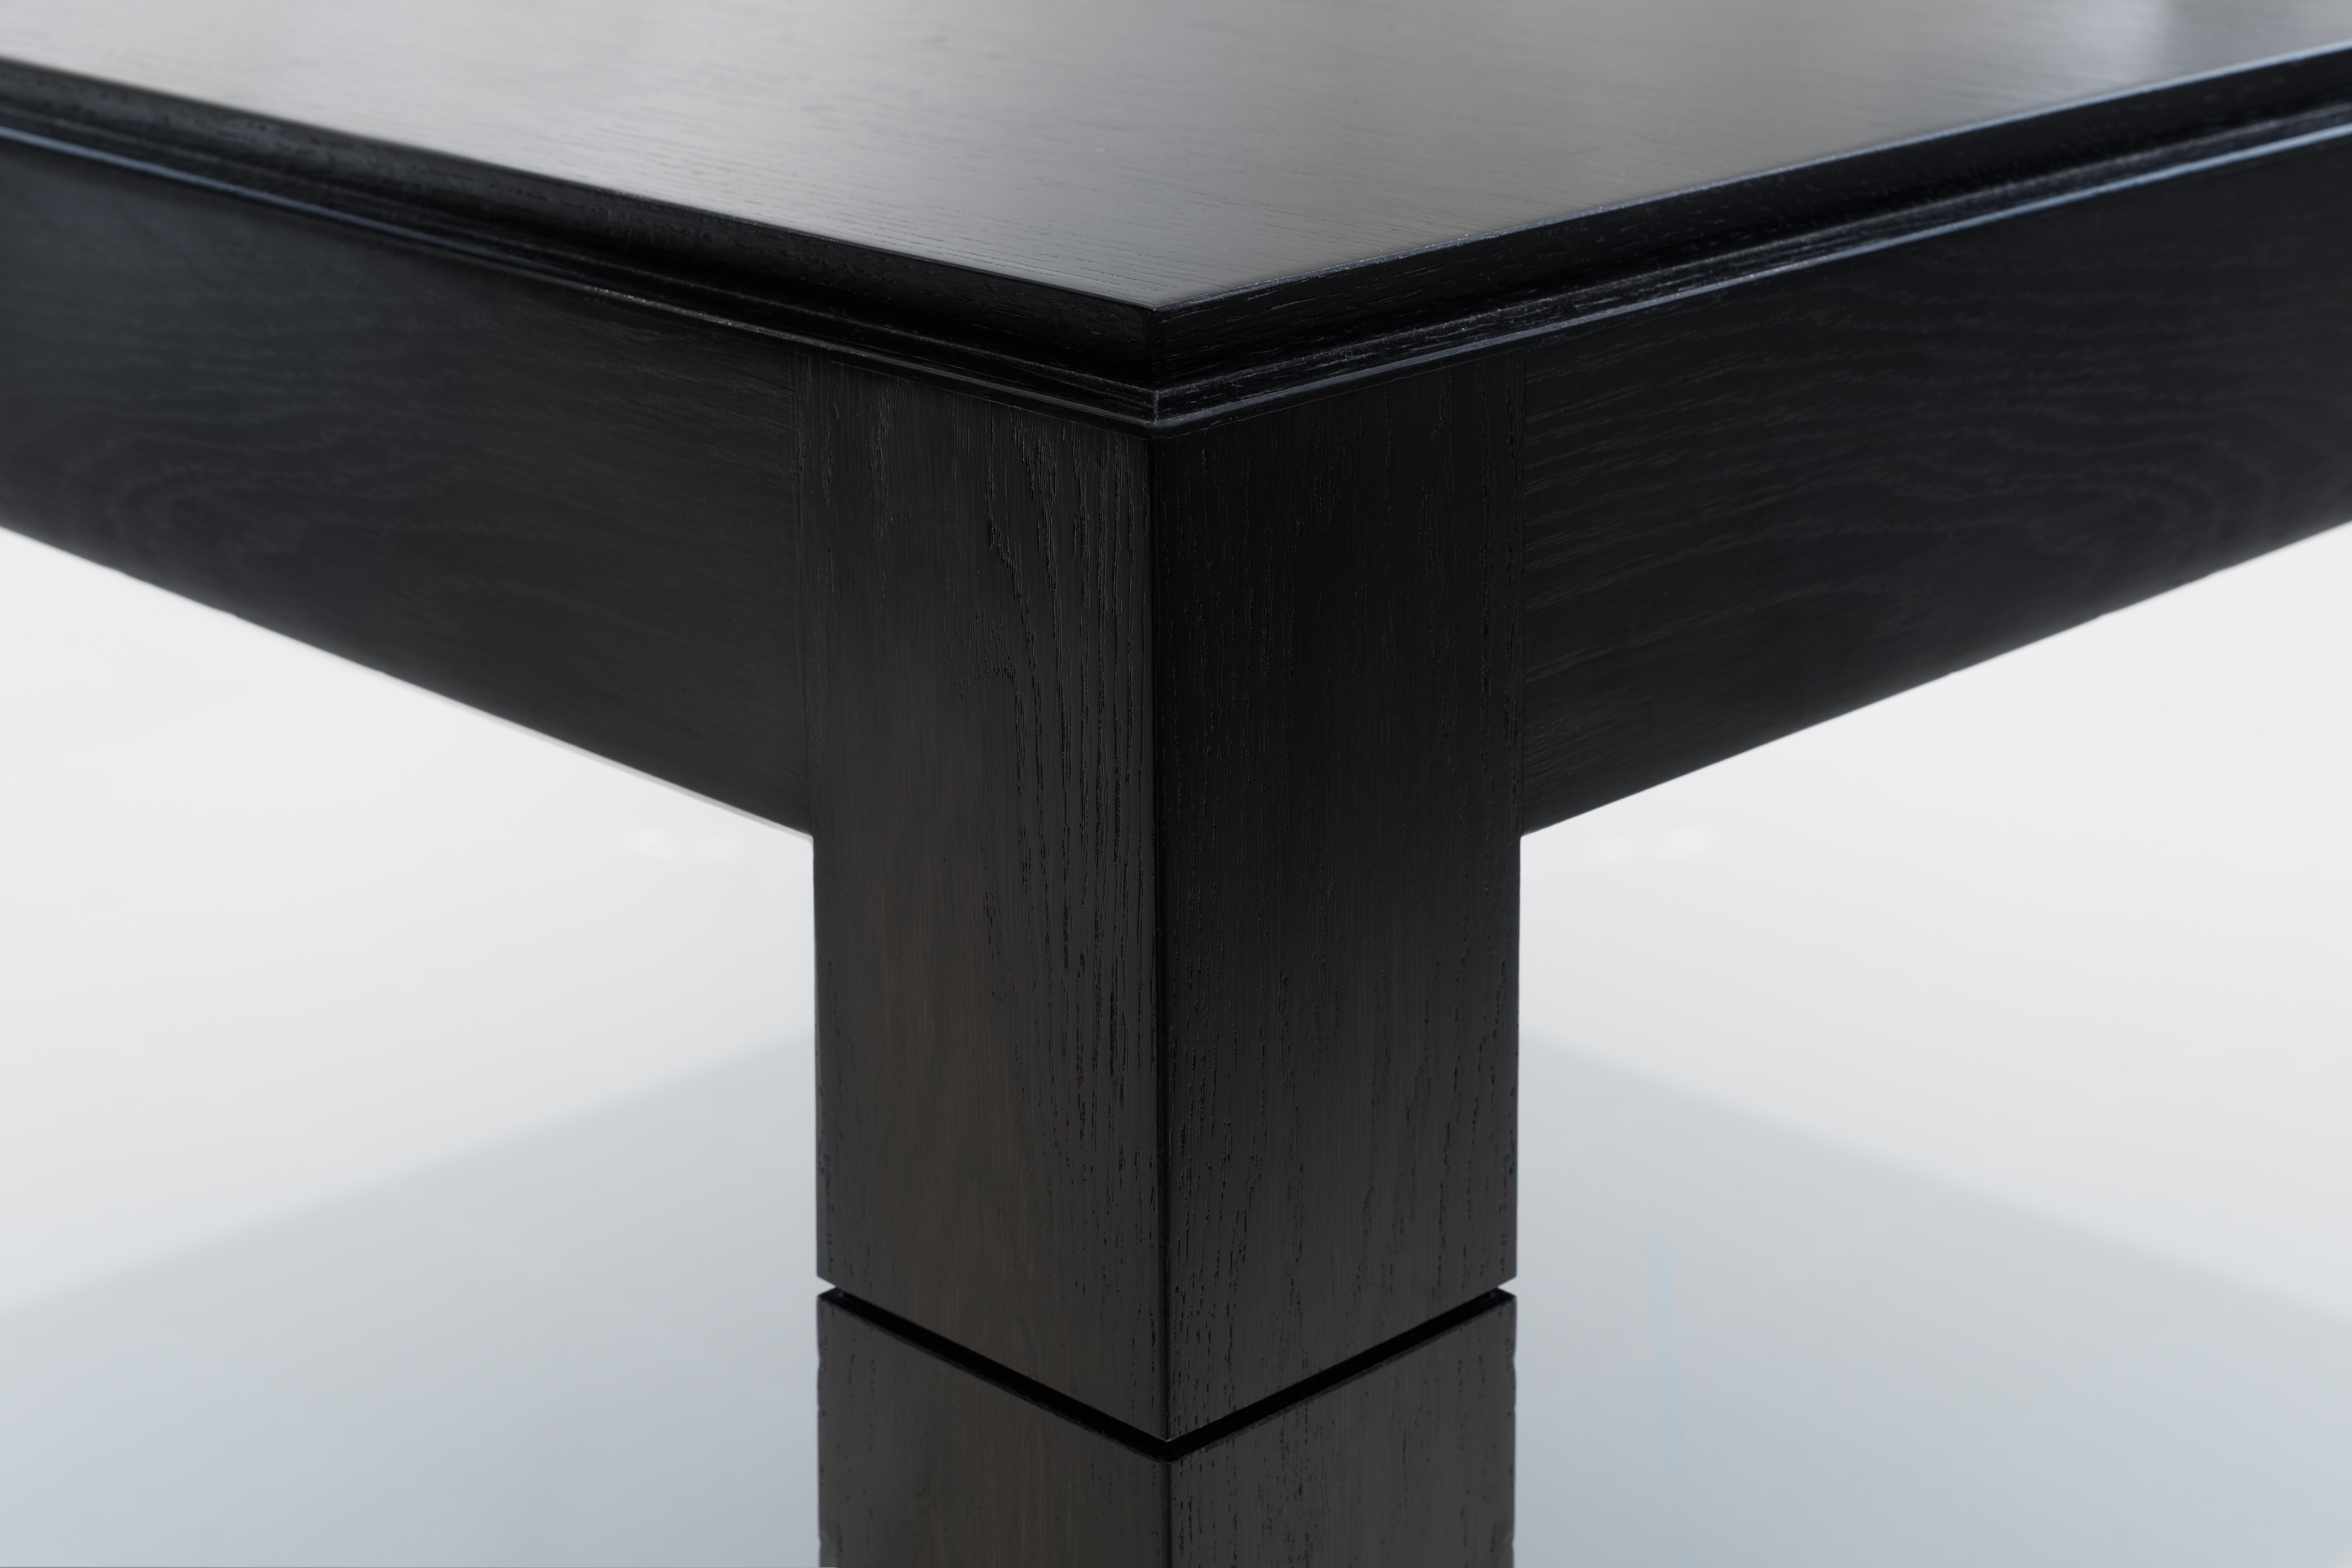 Wonderfully proportioned square table with superb quality ebonised and lacquered finish. Quarter-sawn, straight grain solid cherry square with a stepped edge detail along the upper perimeter. 

Suitable for 8 people seated. Beautiful feature inner